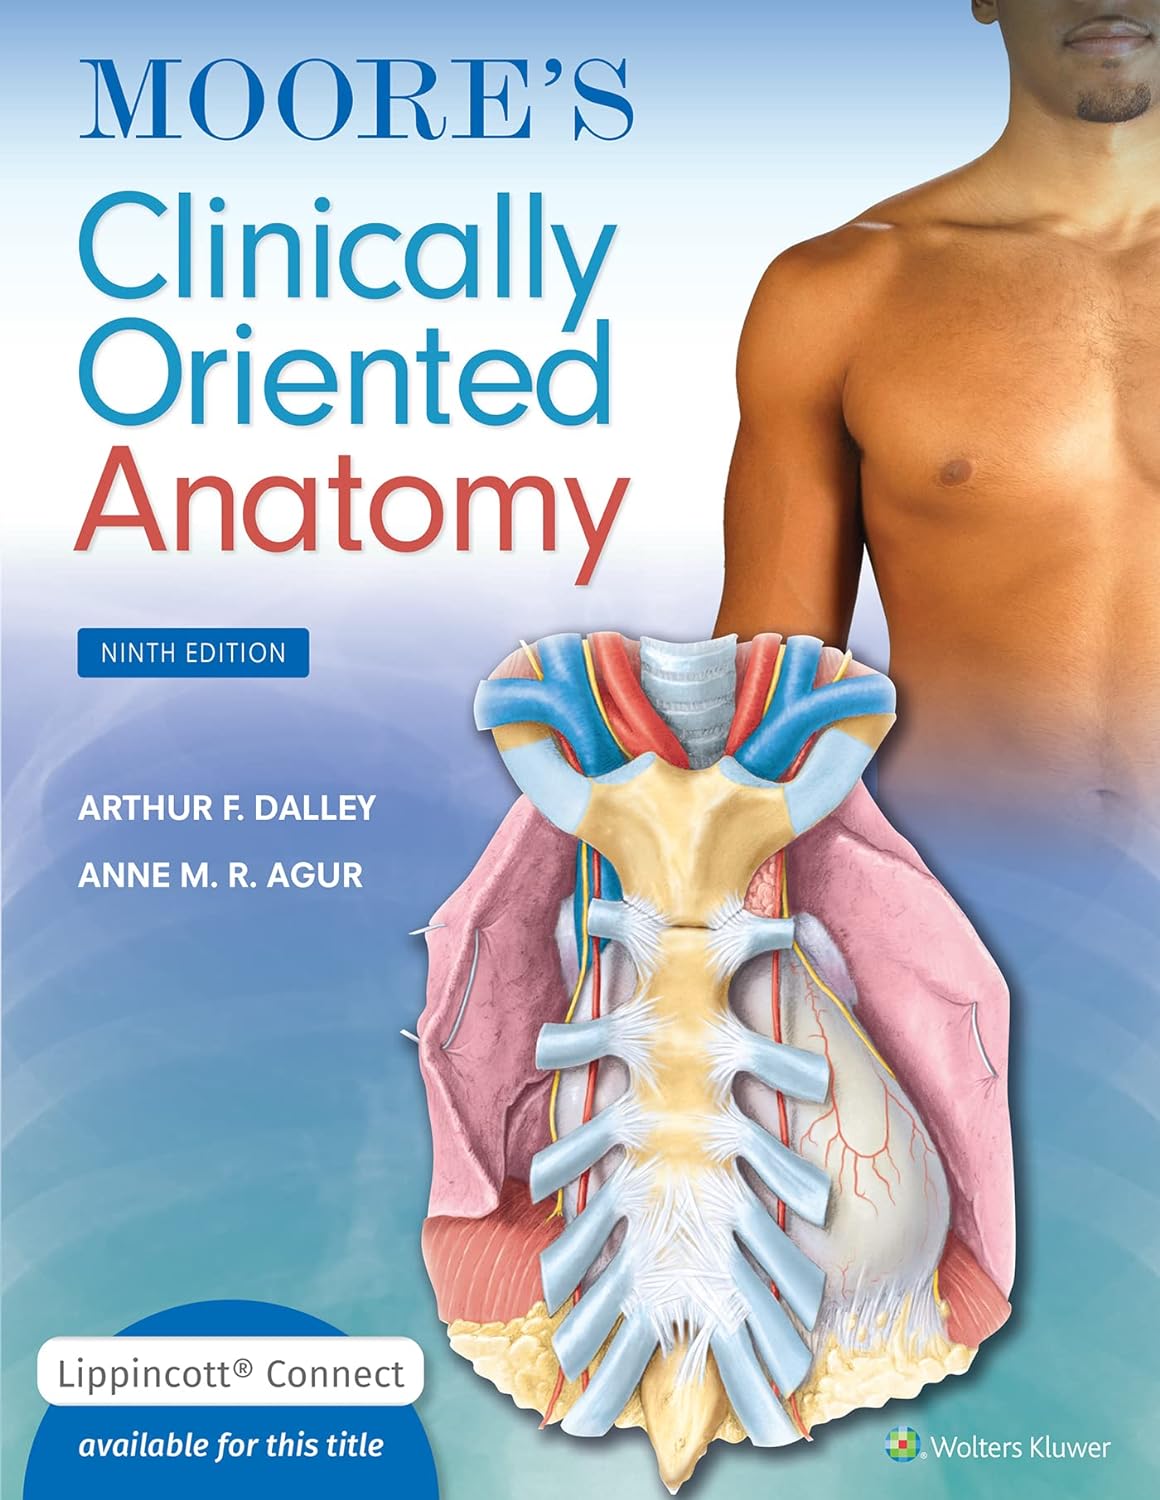 Moore s Clinically Oriented Anatomy, 9th edition  by  Arthur F. Dalley II PhD FAAA